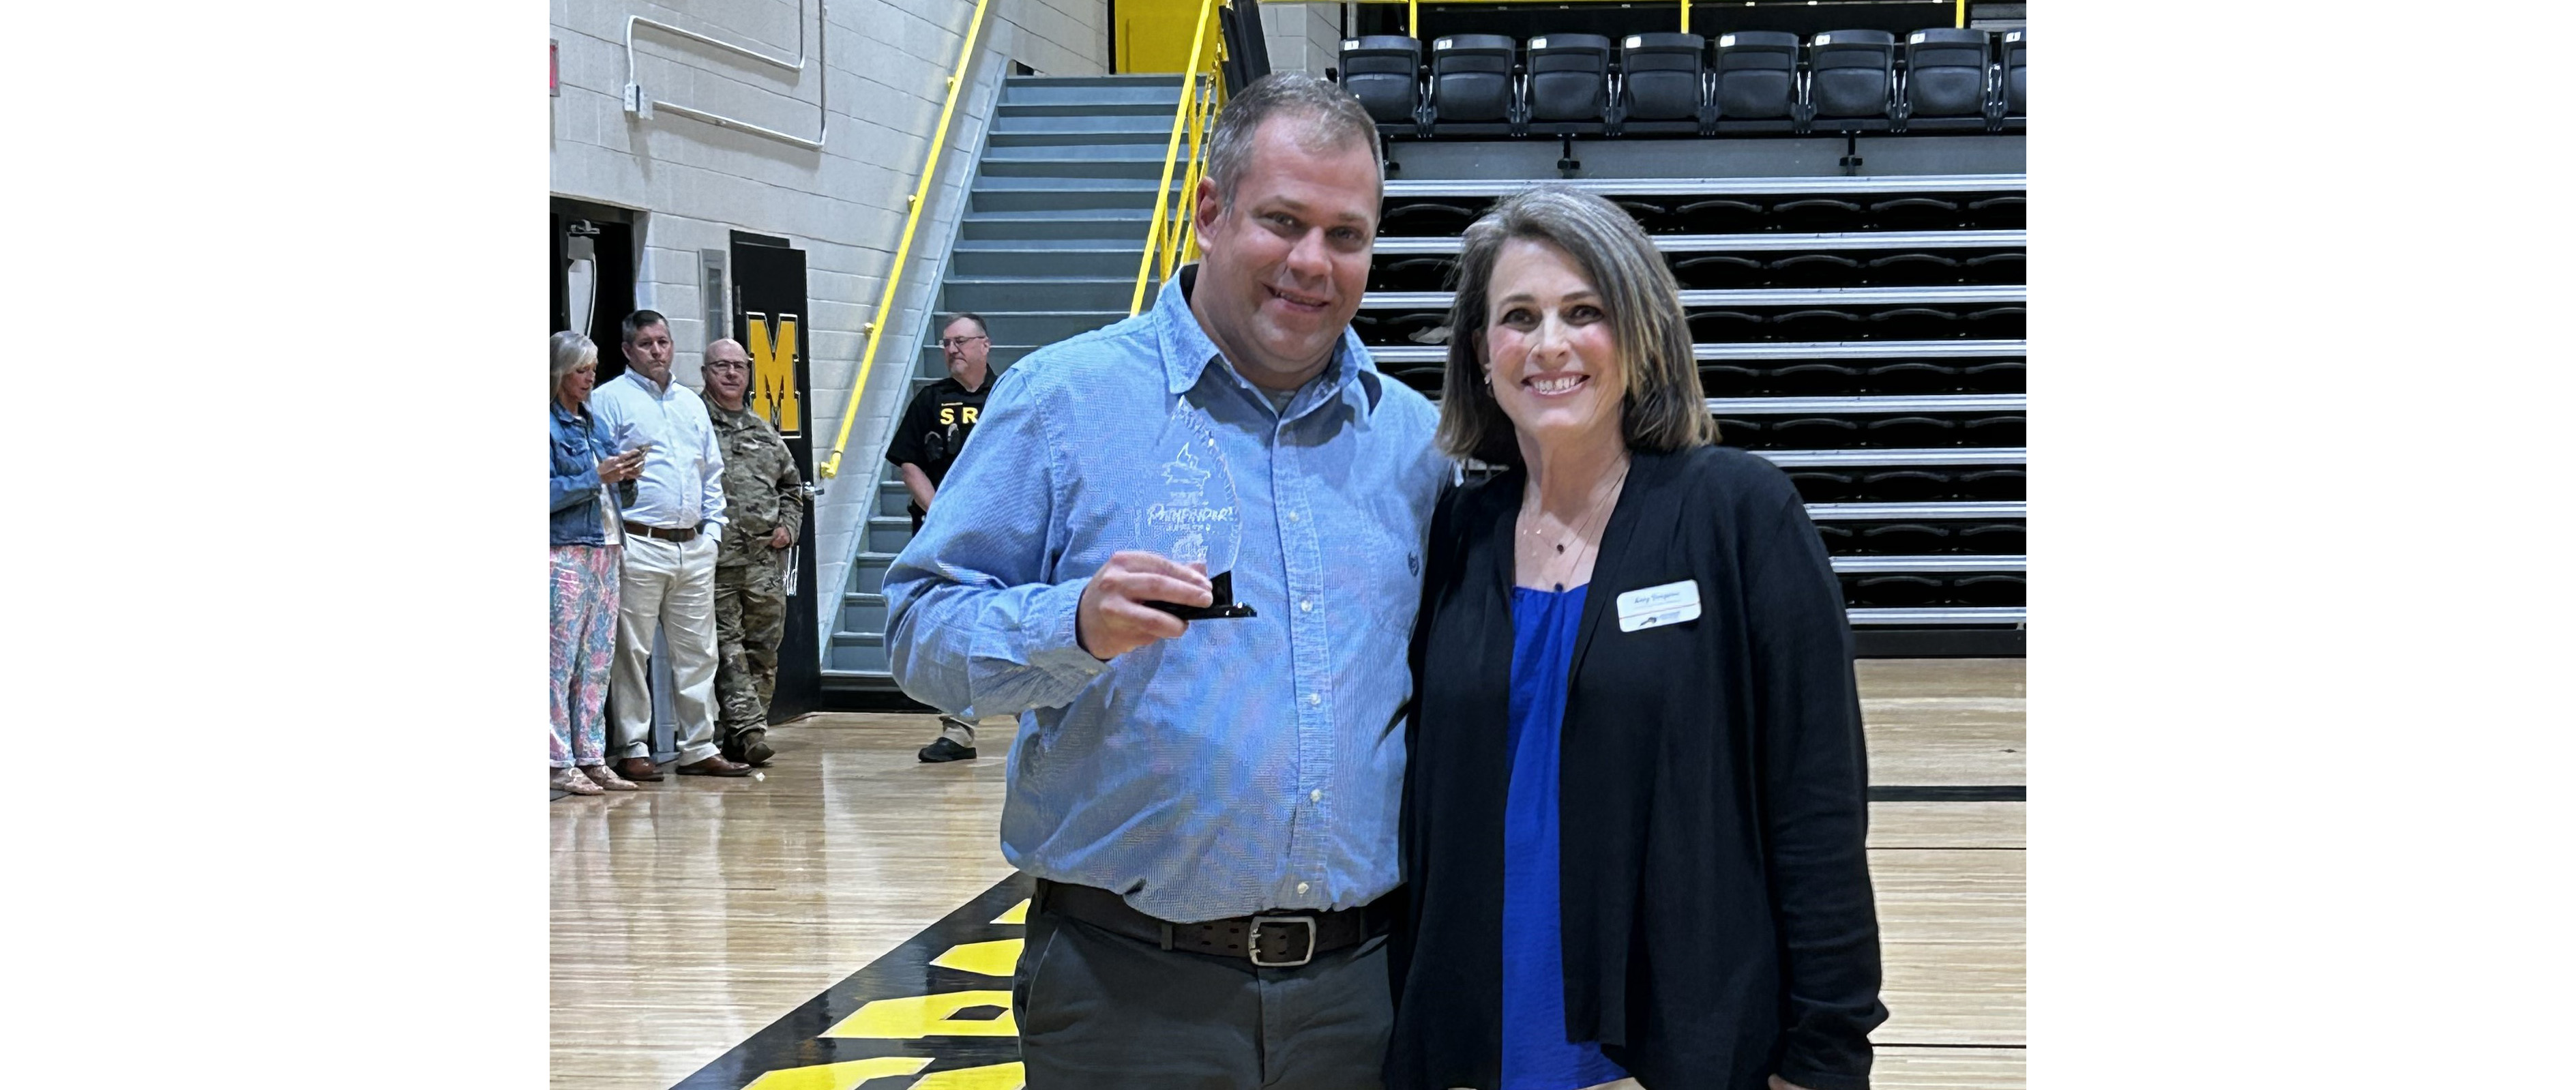 Dr. Amy Simpson, SKCTC Director of Public Relations, presented the SKCTC Pathfinder Award to Richie Rogers from Middlesboro High School